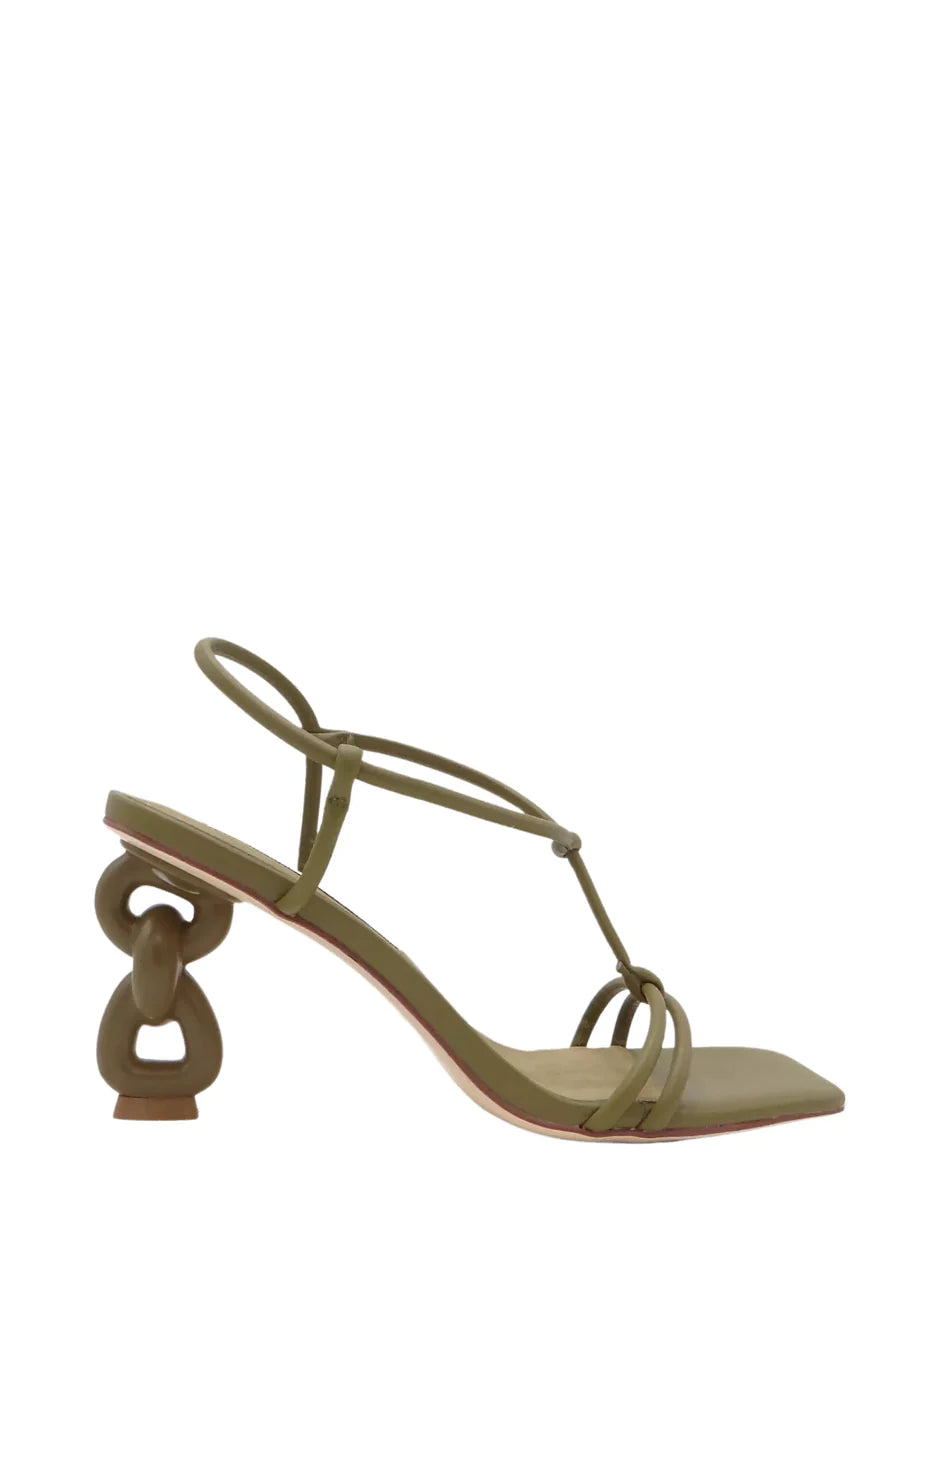 CAVERLEY Amber Heel in Olive 23S523C Olive FROM EIGHTYWINGOLD - OFFICIAL BRAND PARTNER